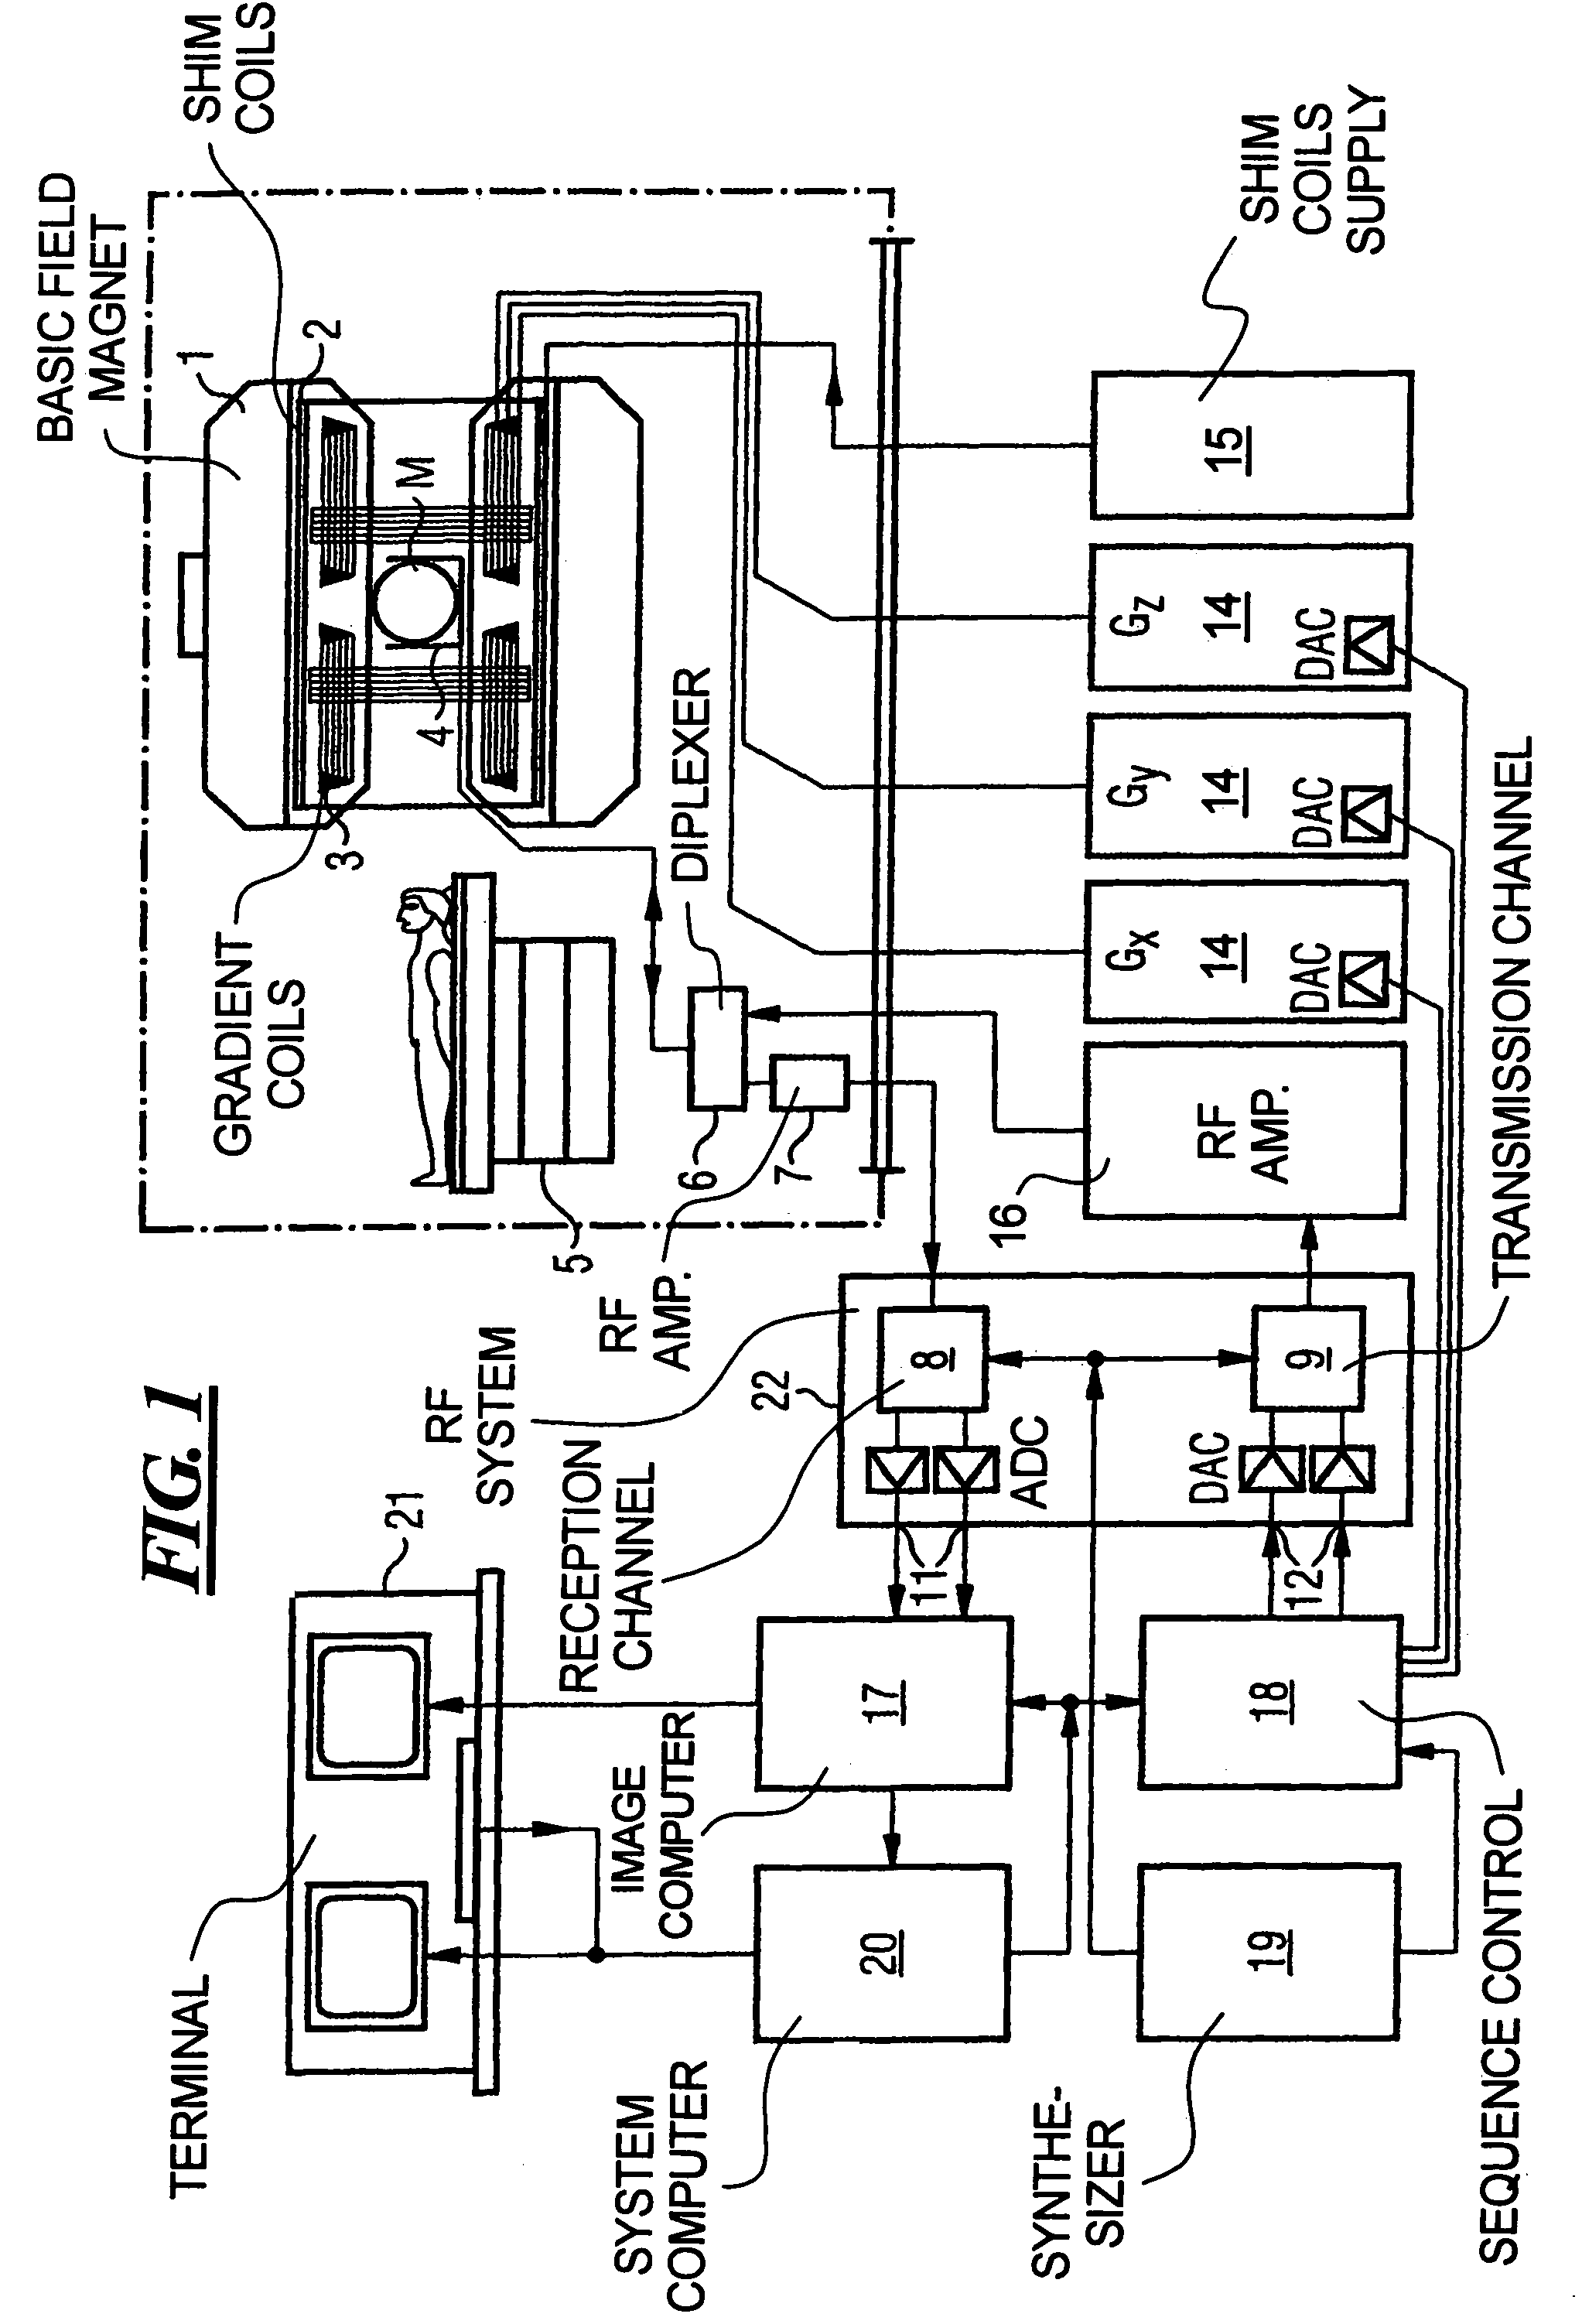 Multi-coil magnetic resonance data acquisition and image reconstruction method and apparatus using blade-like k-space sampling